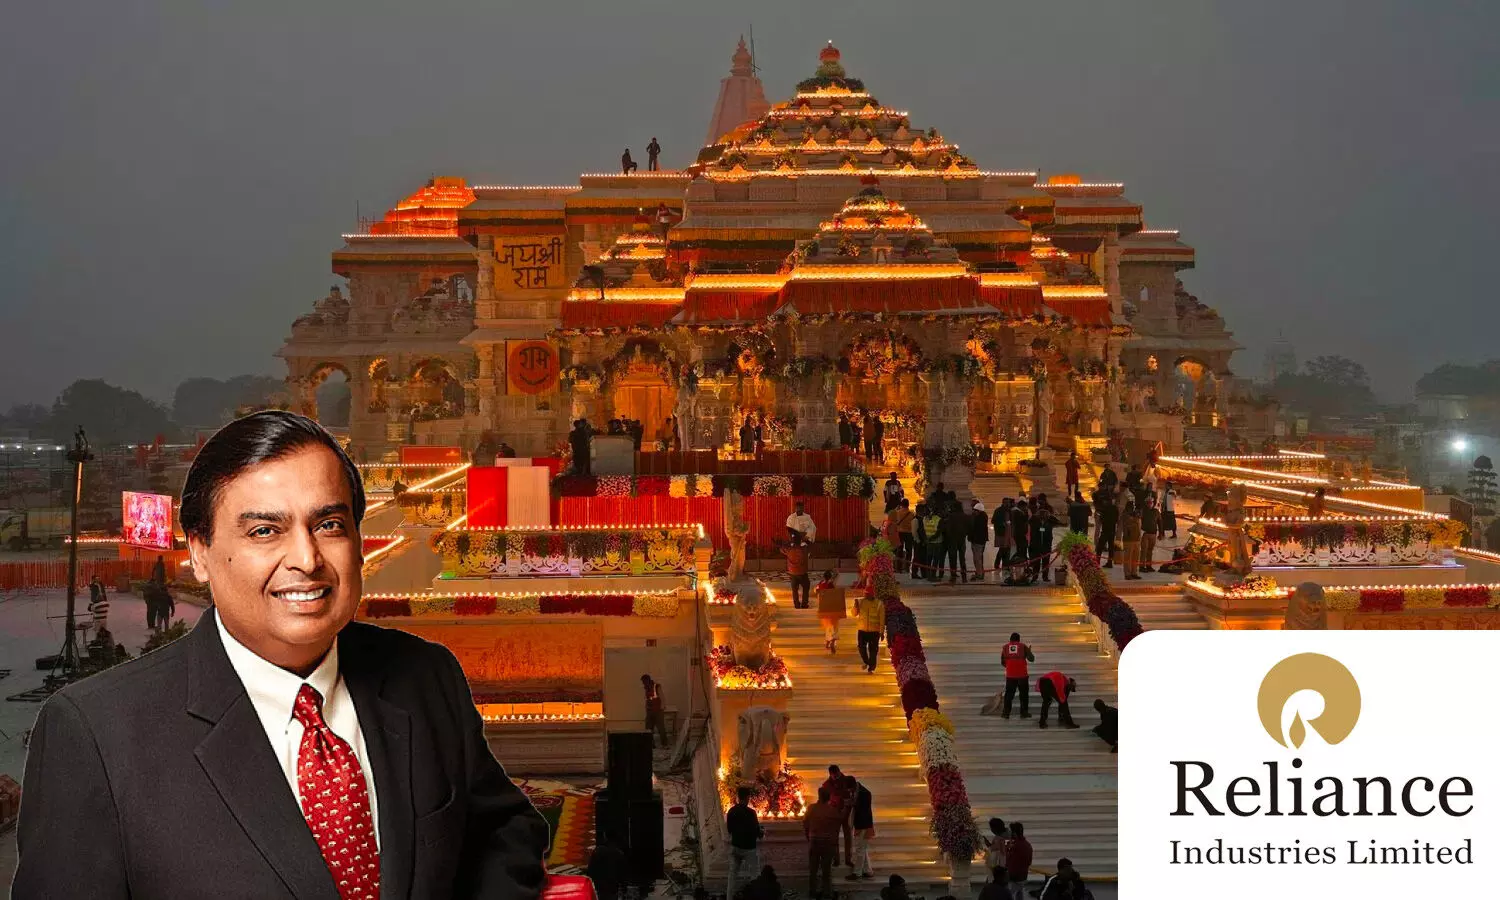 Reliance initiatives for pilgrims at Ram Temple- Reliance Industries support for Ram Mandir event